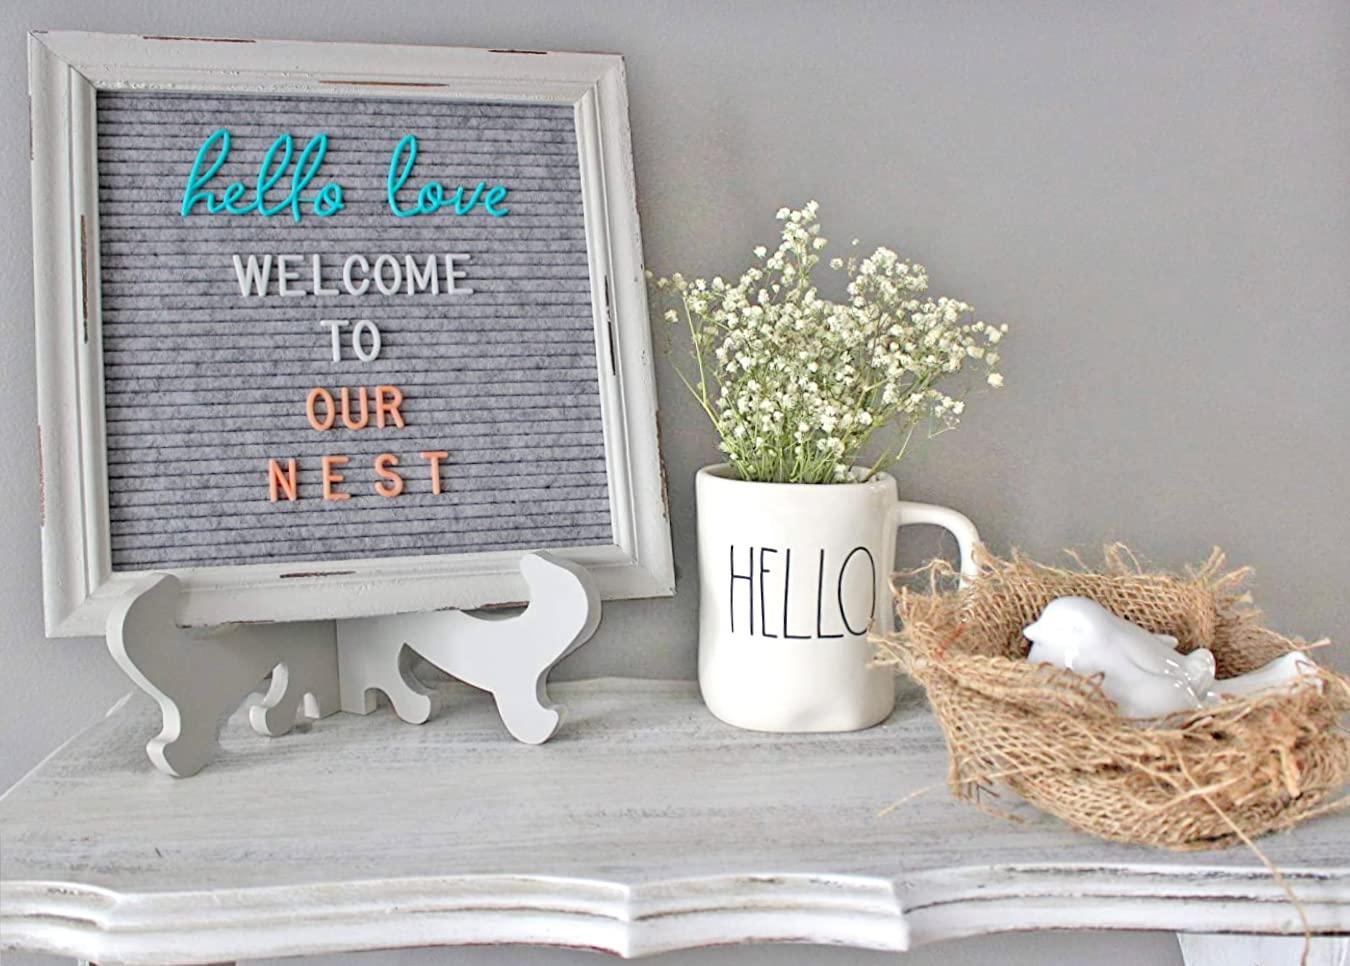 Felt Creative Home Goods Rustic Felt Letter Board Ultimate Bundle Farmhouse Vintage White Wood Frame and Stand Changeable Message Memo Board 800+ Letter Set and Custom Easel (Grey, 12x16 Inches) 1